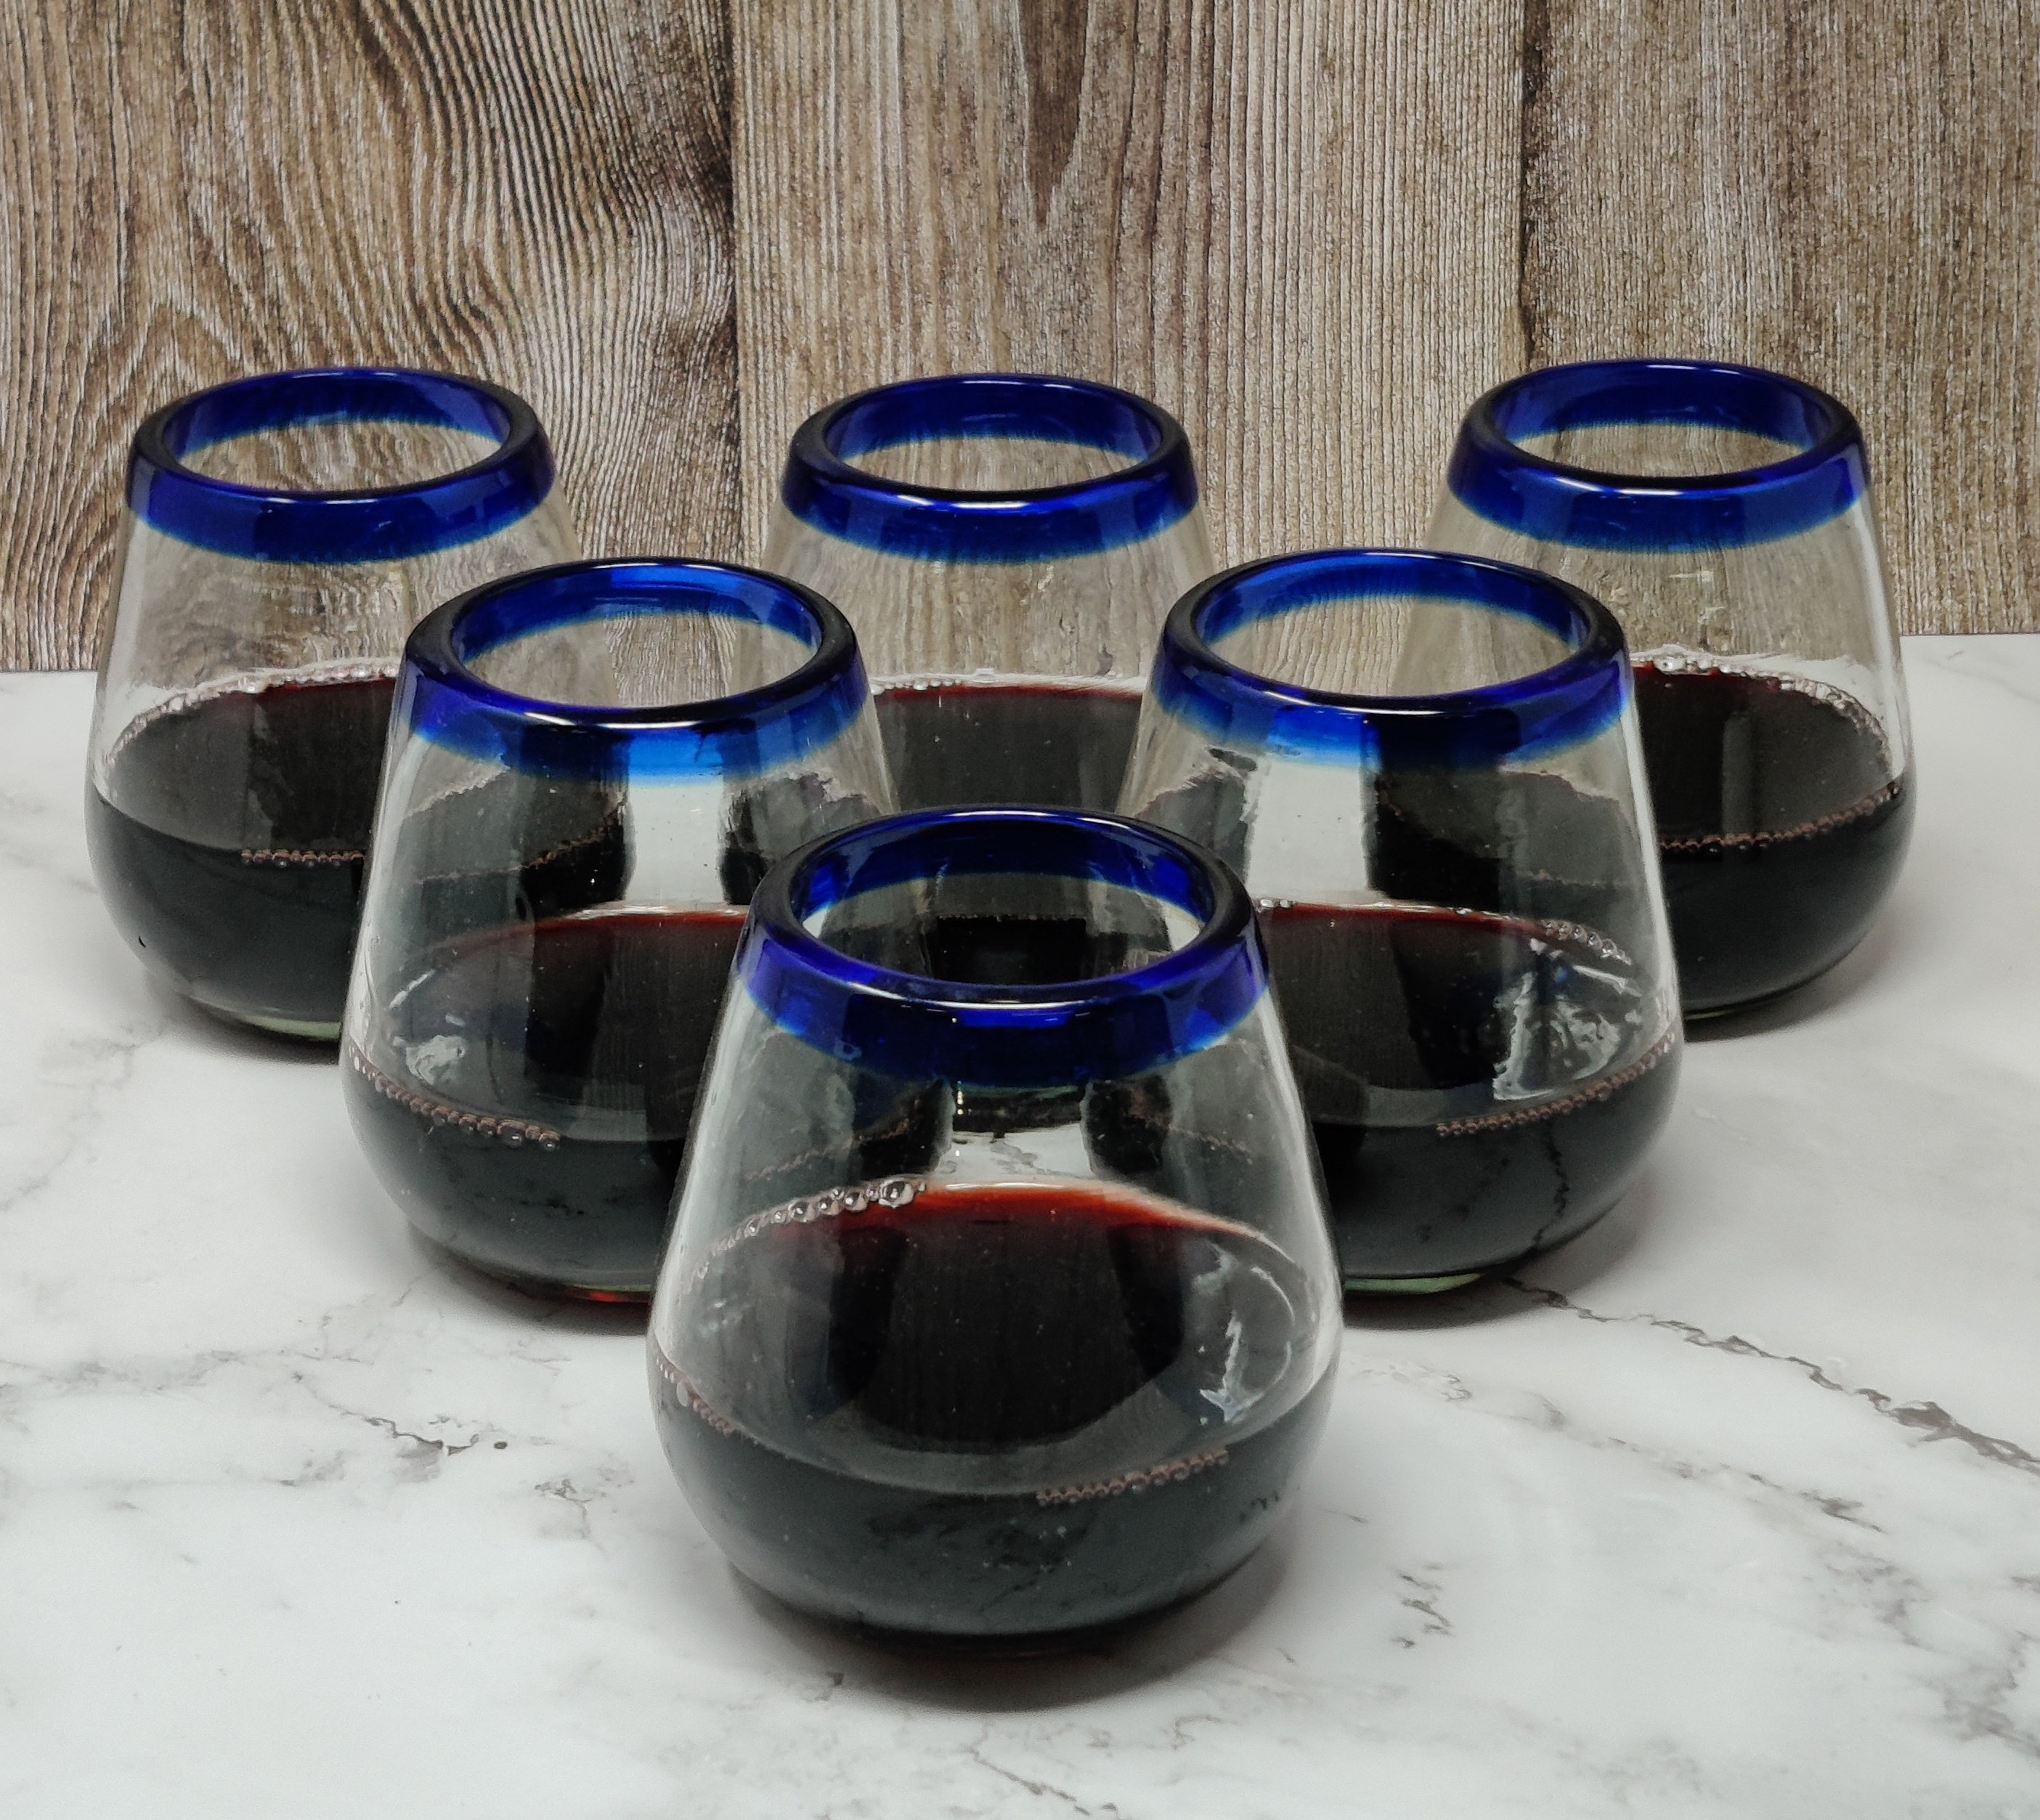 Handblown Recycled Tall Wine Glasses - Set of 6 - Cobalt Spiral